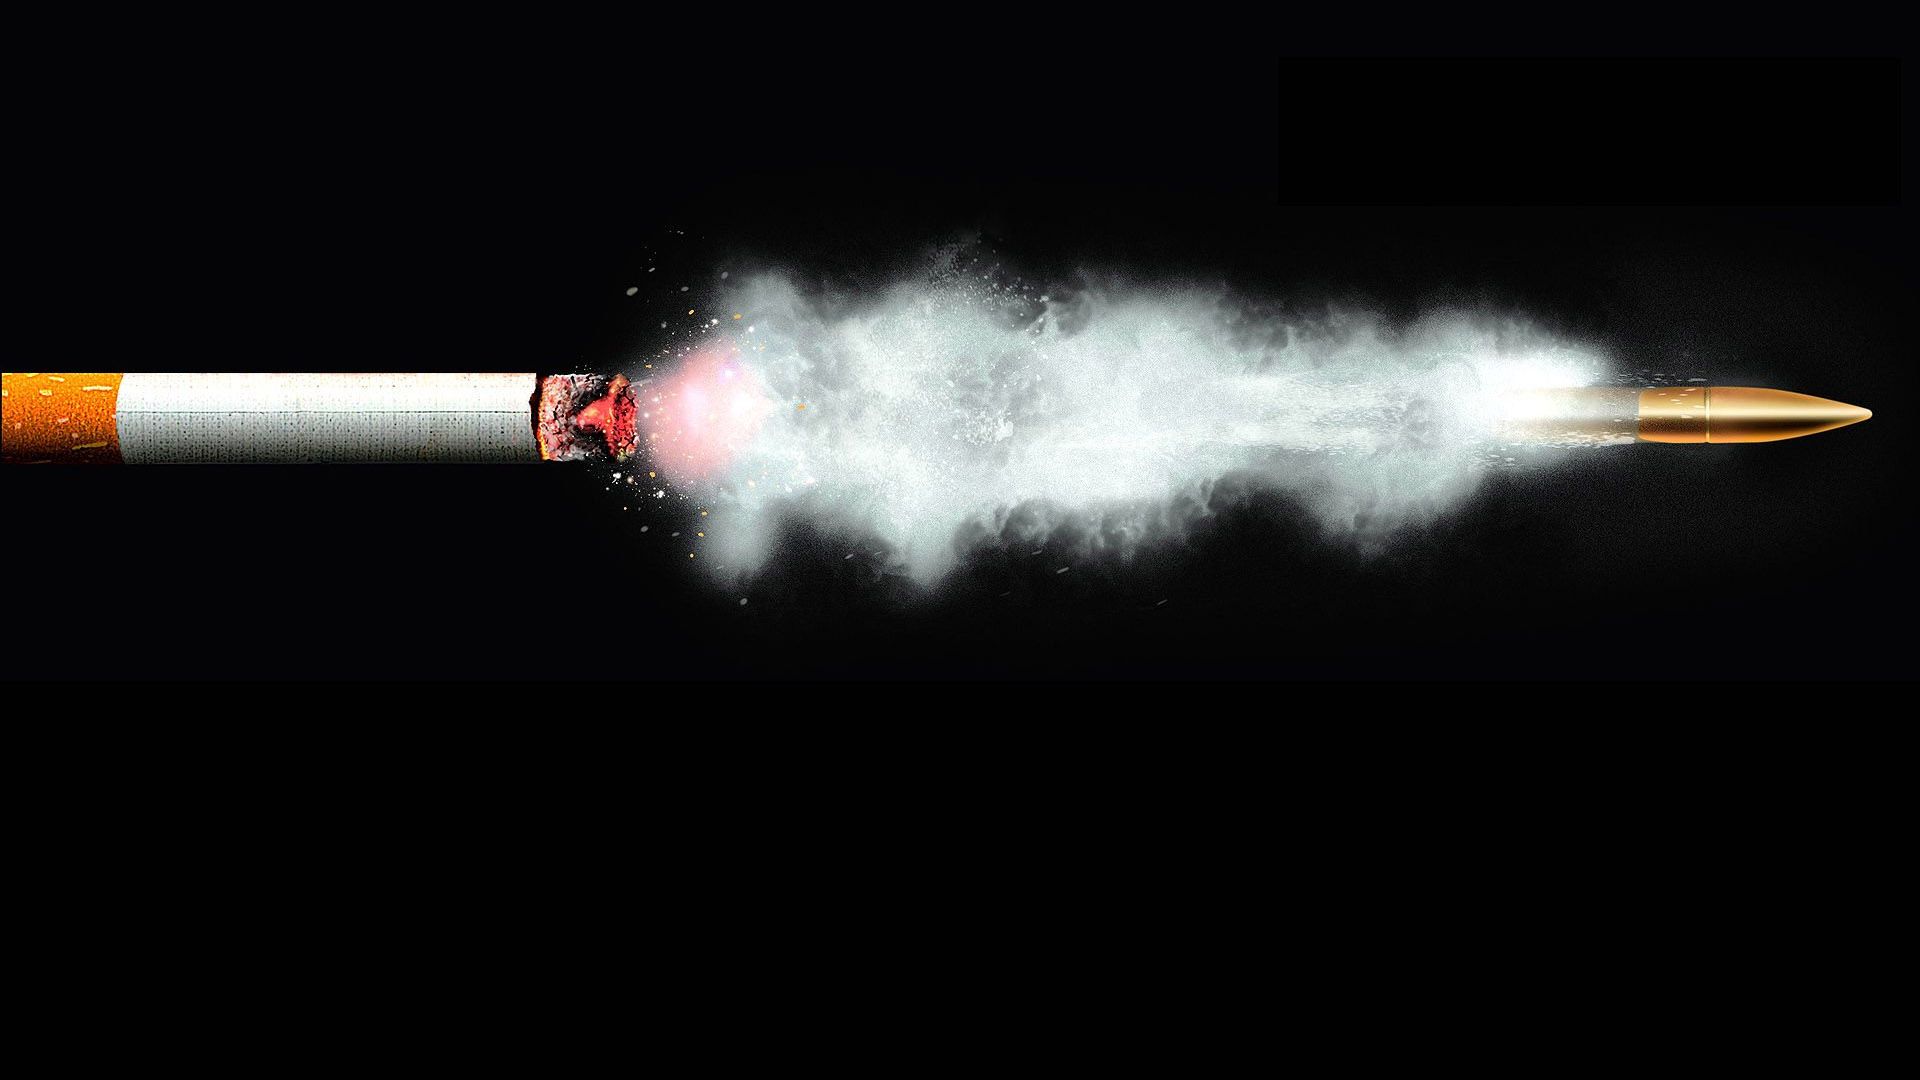 Abstract Cigarette Smoke Background .wallpapertip.com